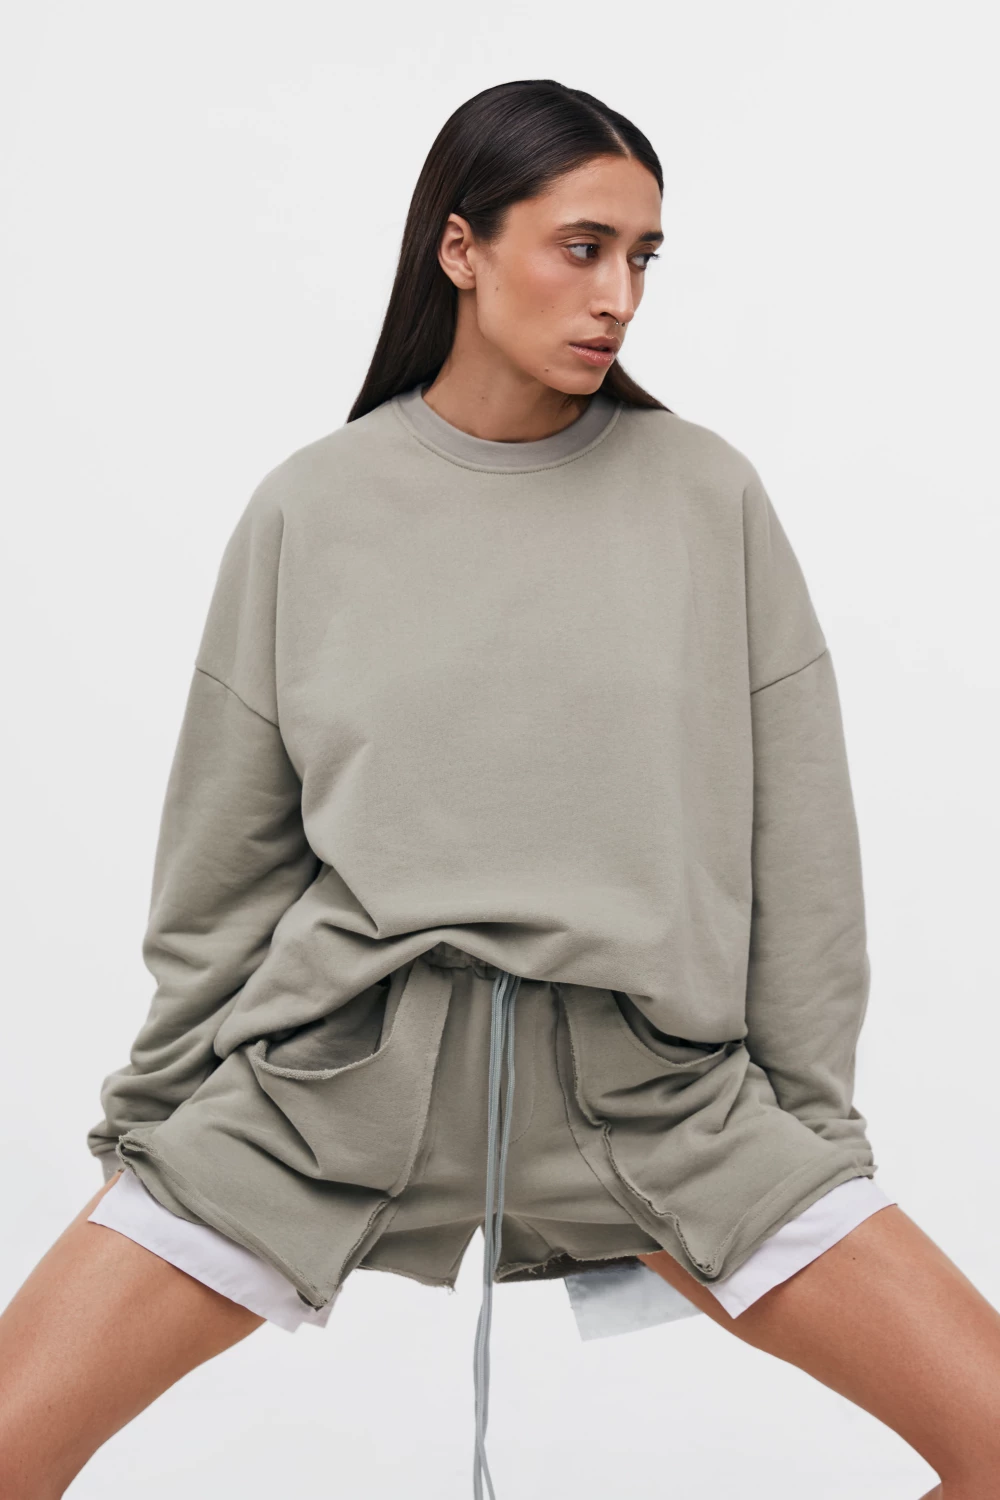 sweatshirt "basic" in forest color